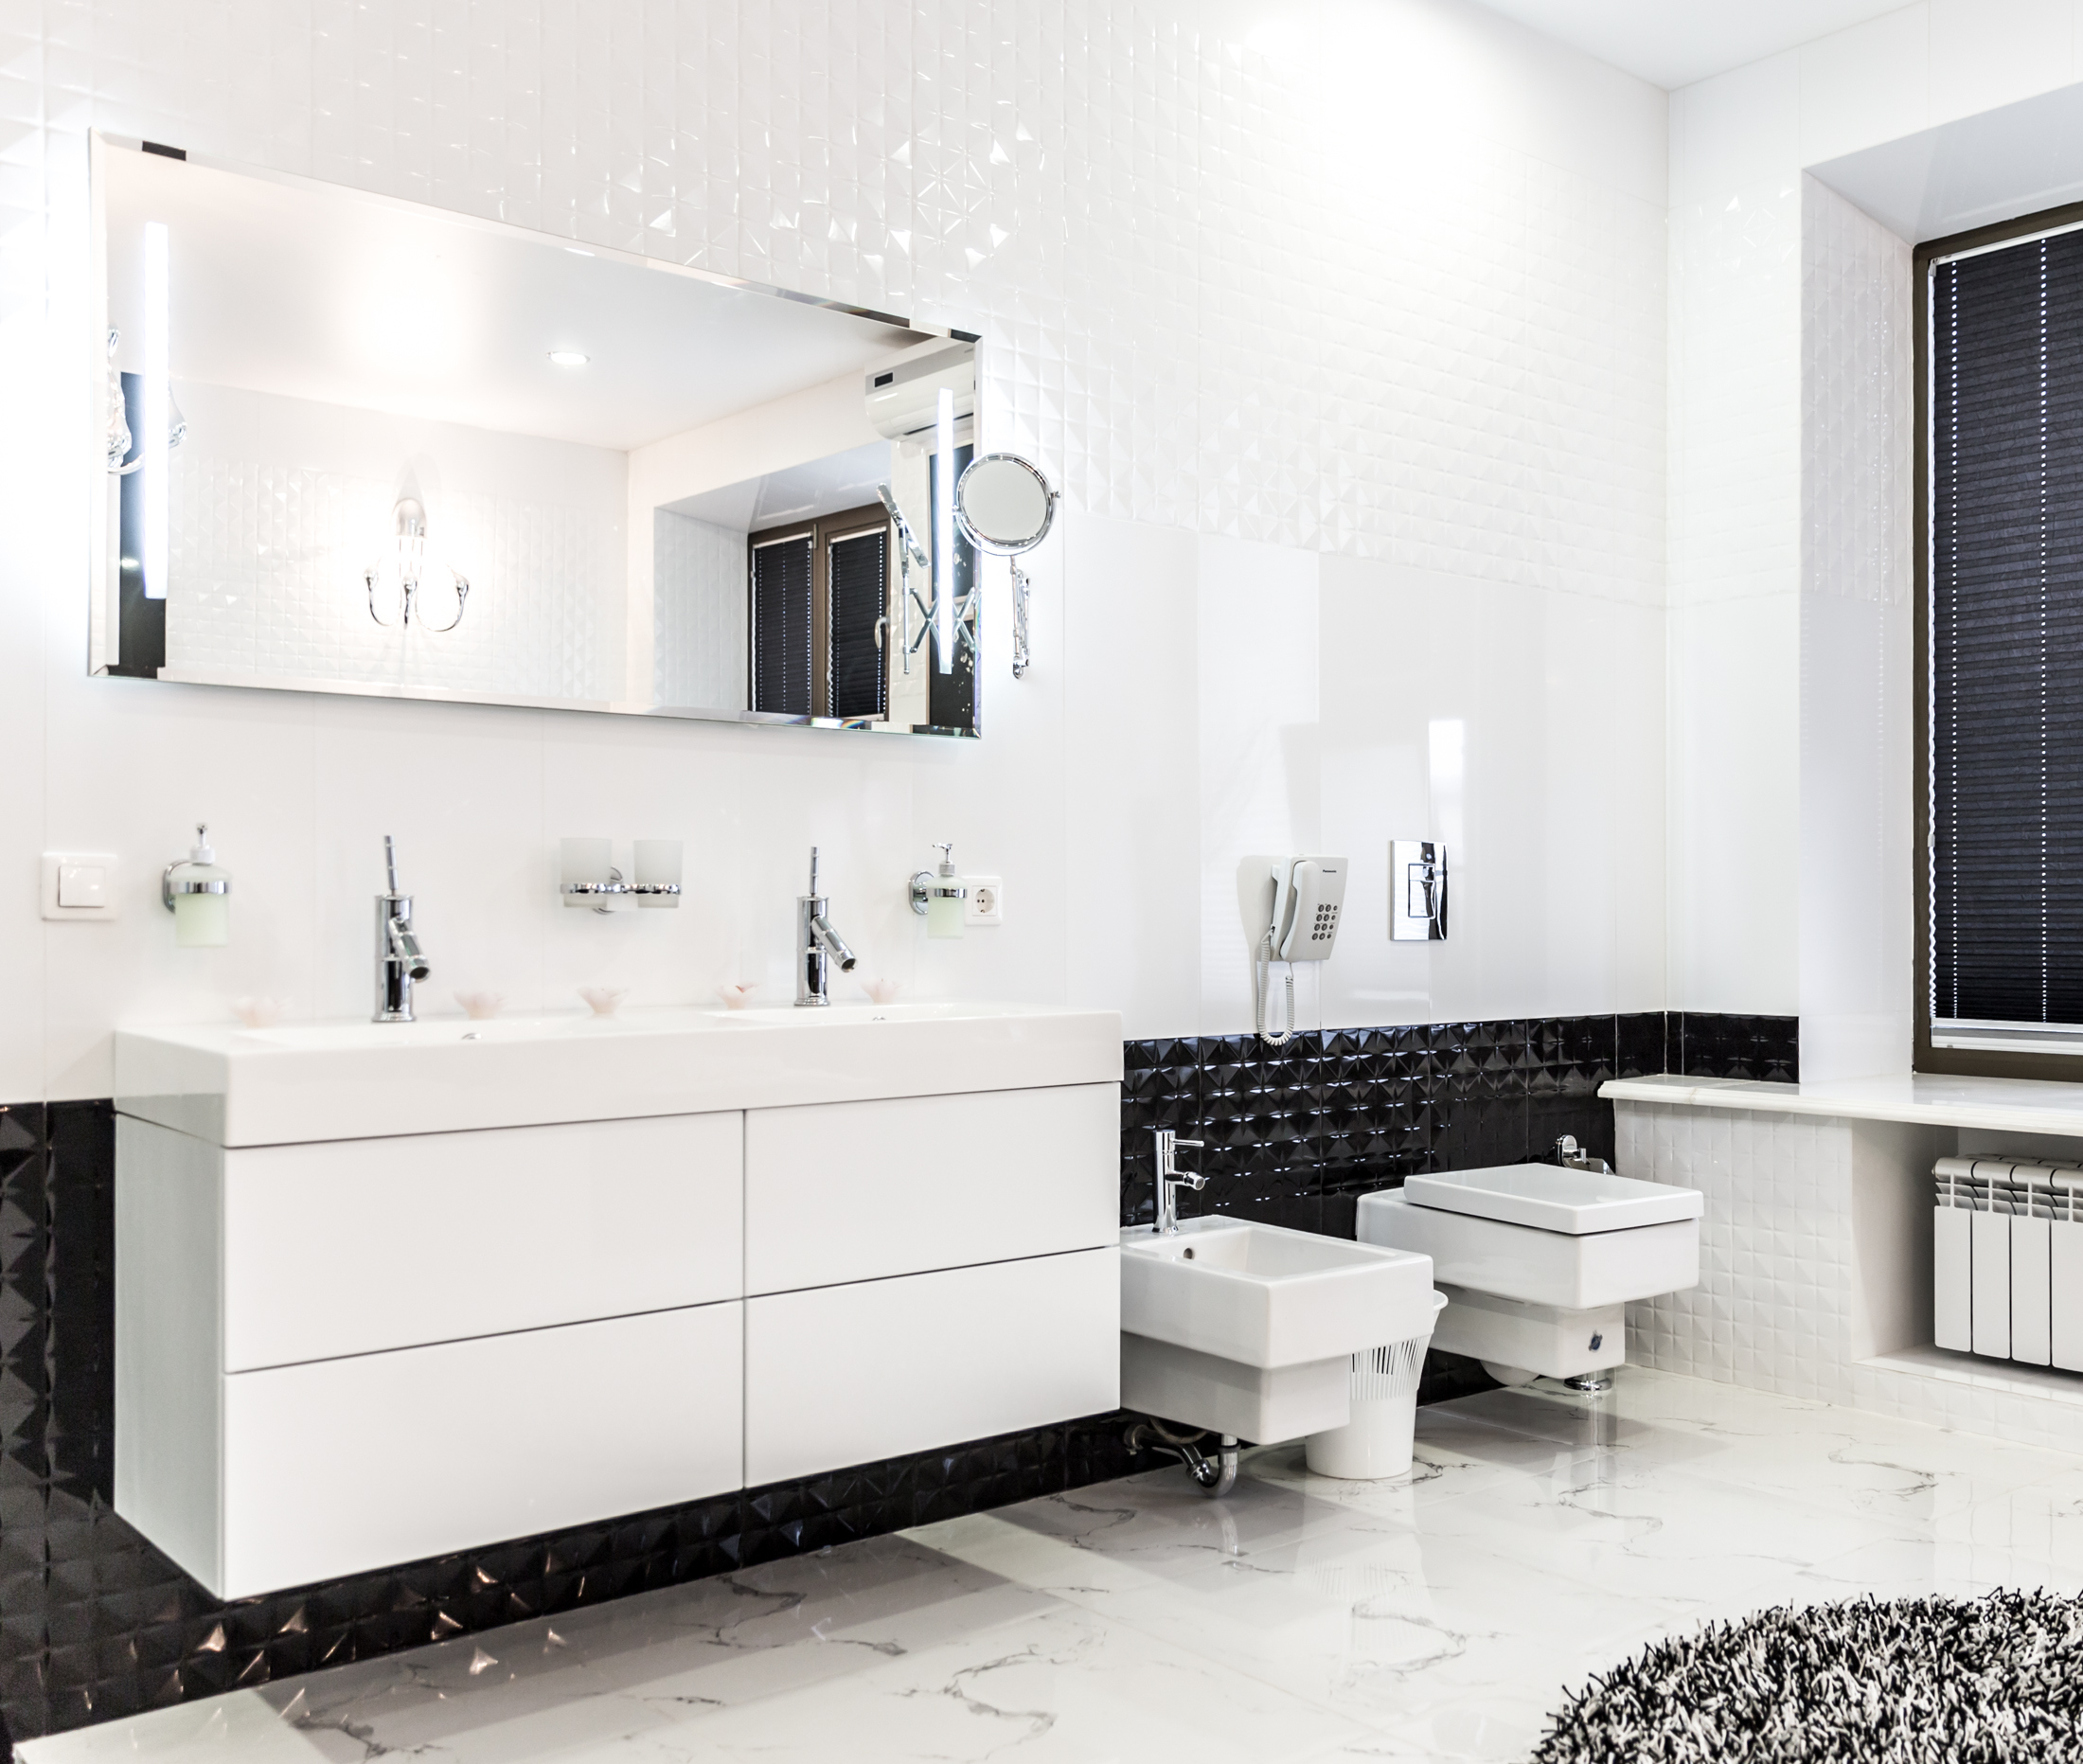 Lifestyle image of a black and white bathroom, with marble floor and a strip of black tiles along the lower part of the wall